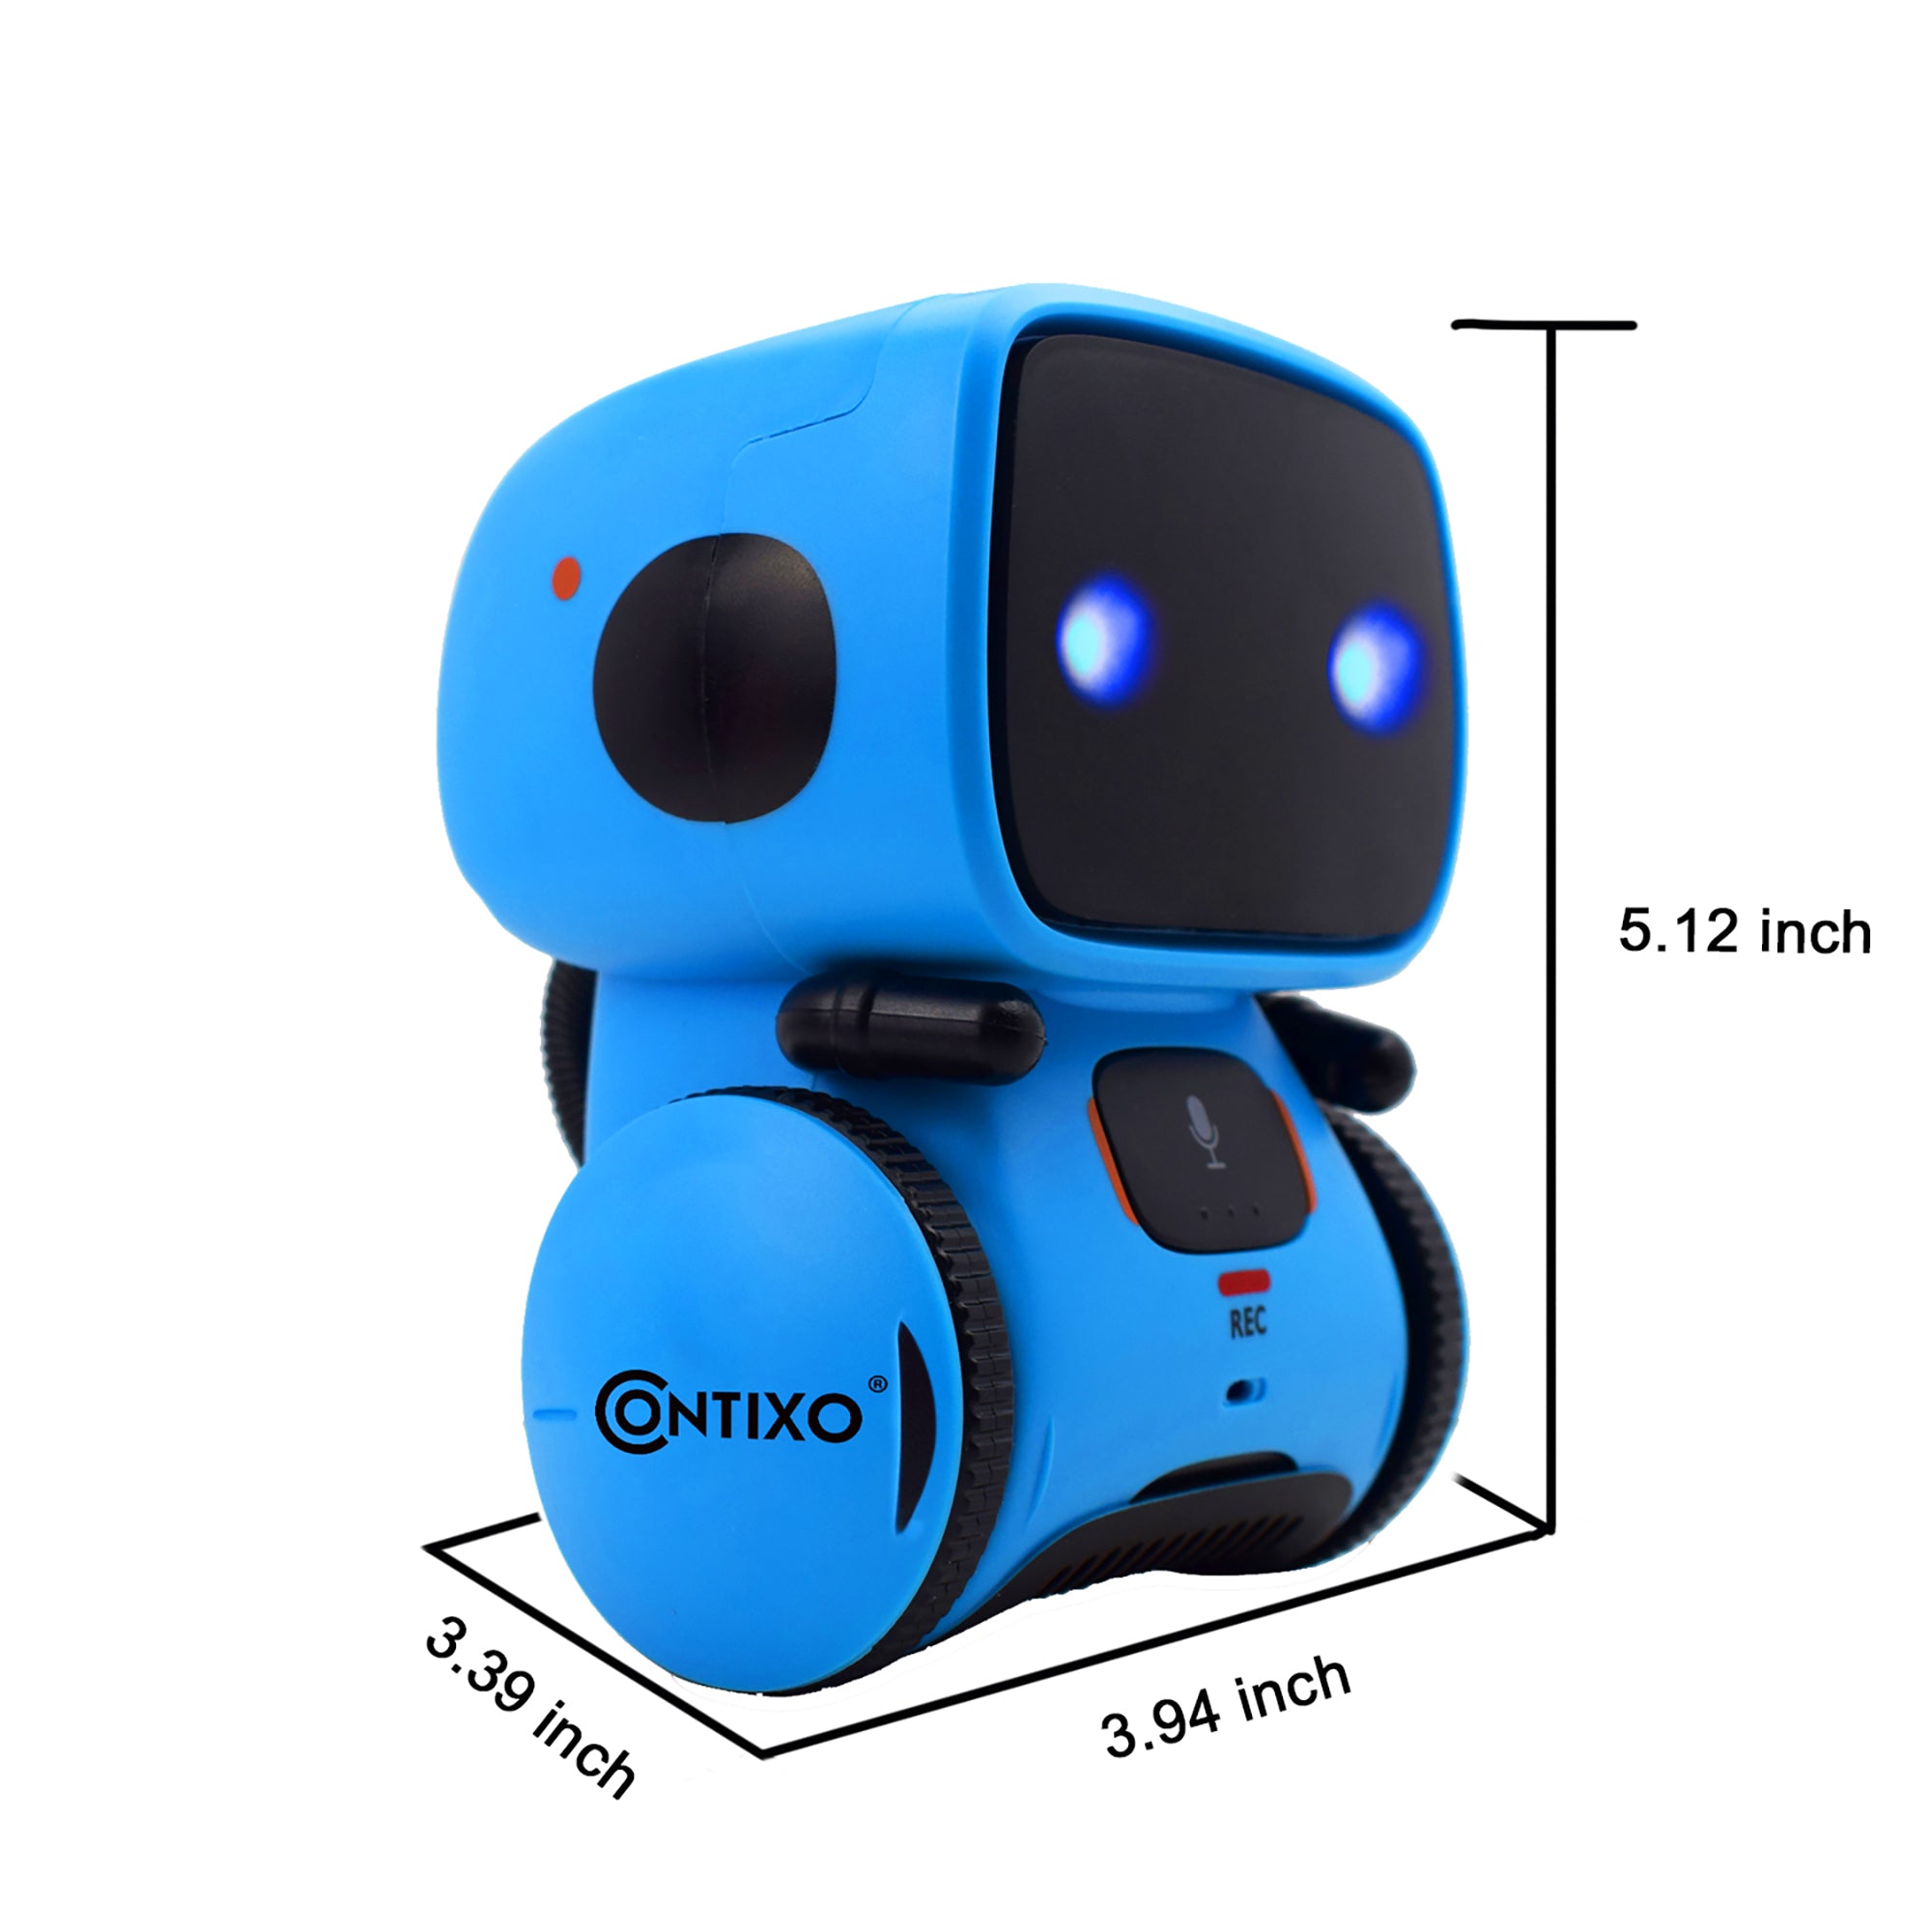 RC Robot Toys for Kids, Large Programmable Remote Control Smart Walking  Dancing Robot